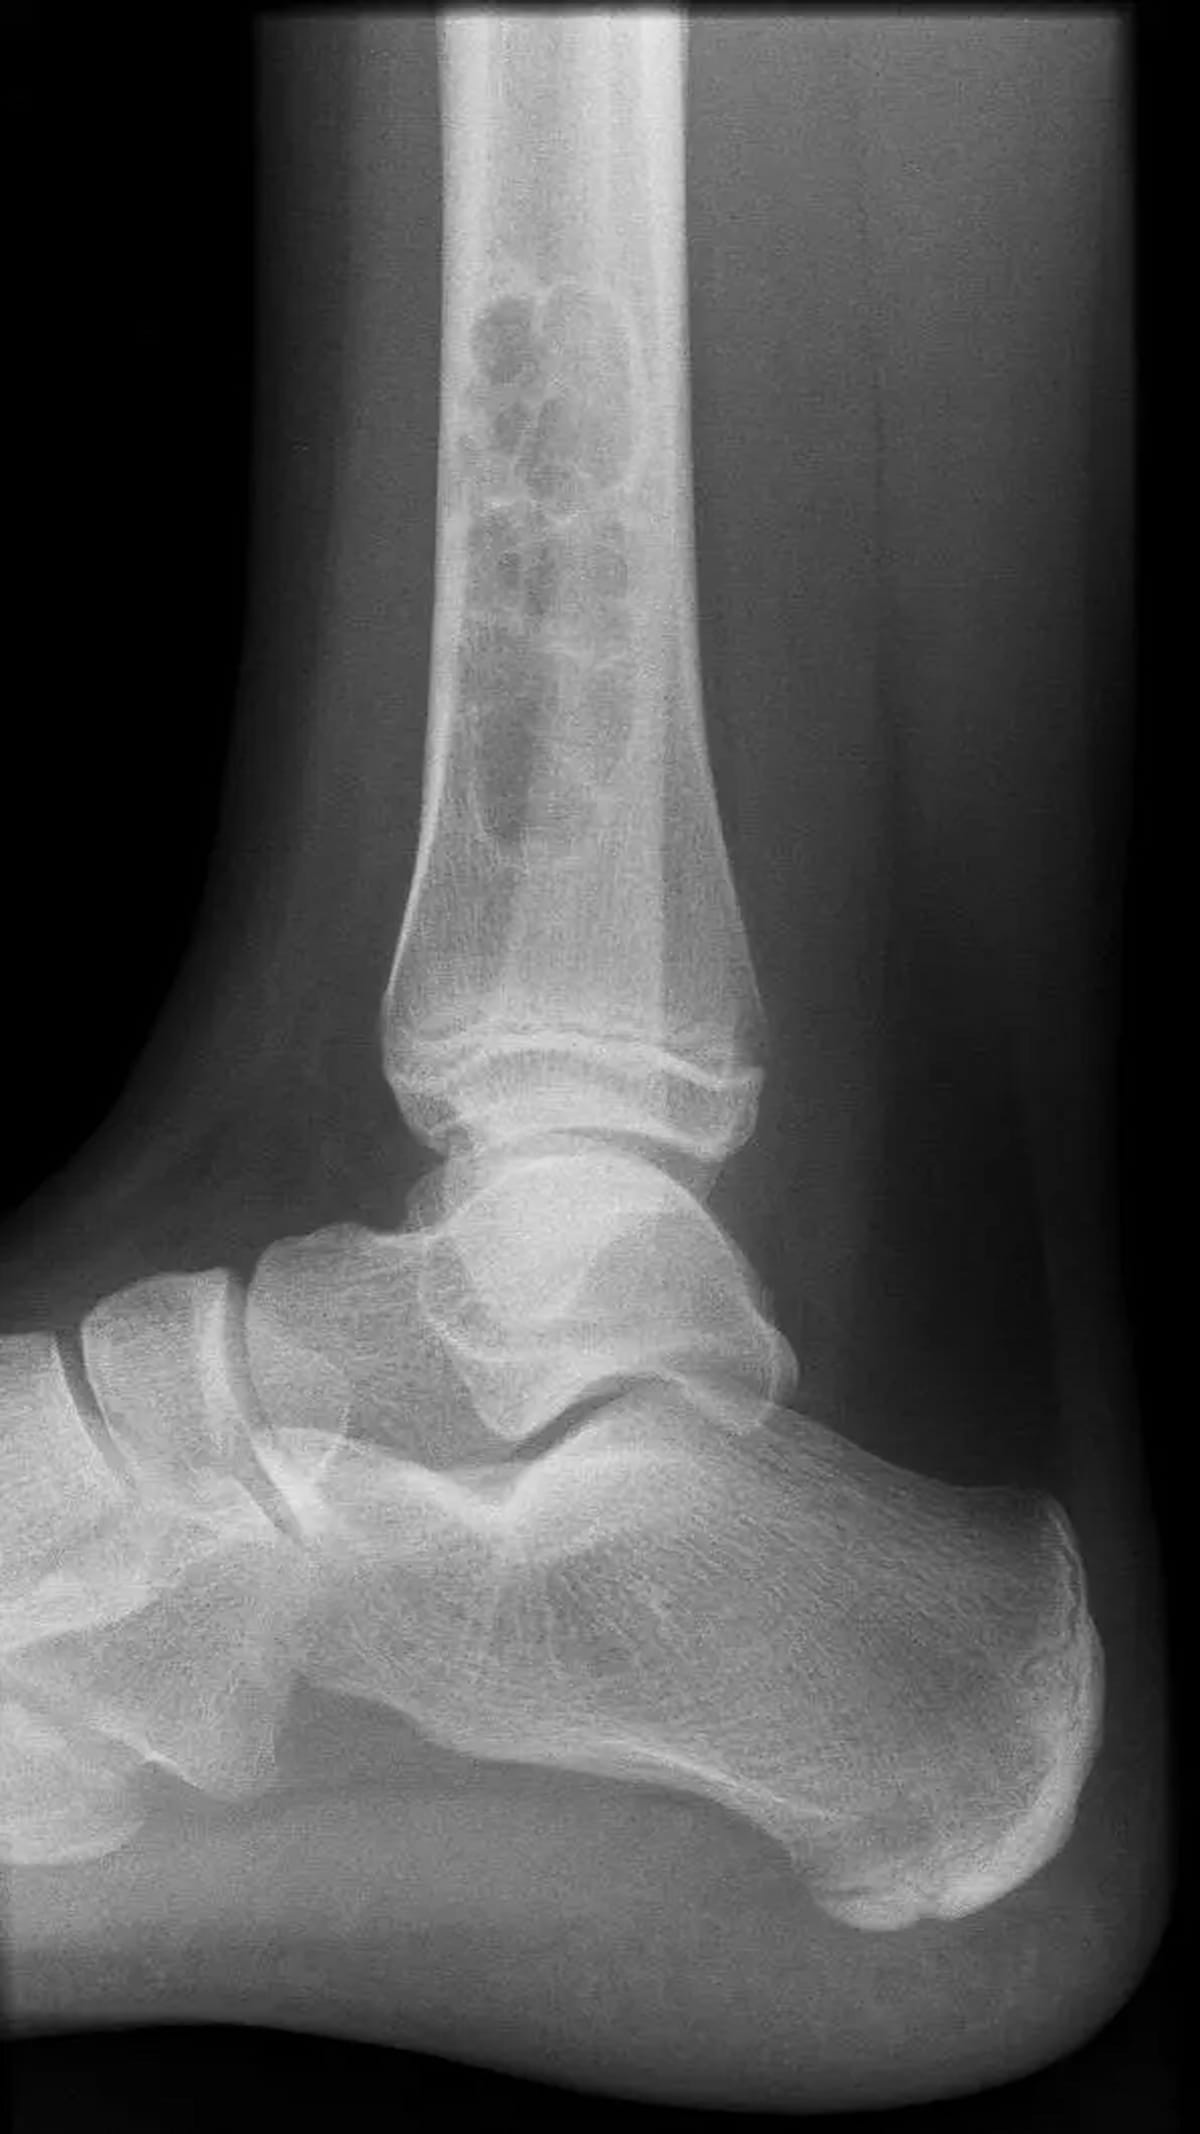 Image IQ Quiz: Pediatric Patient with Lower Extremity Pain and Lesion in Long Bone Metaphysis